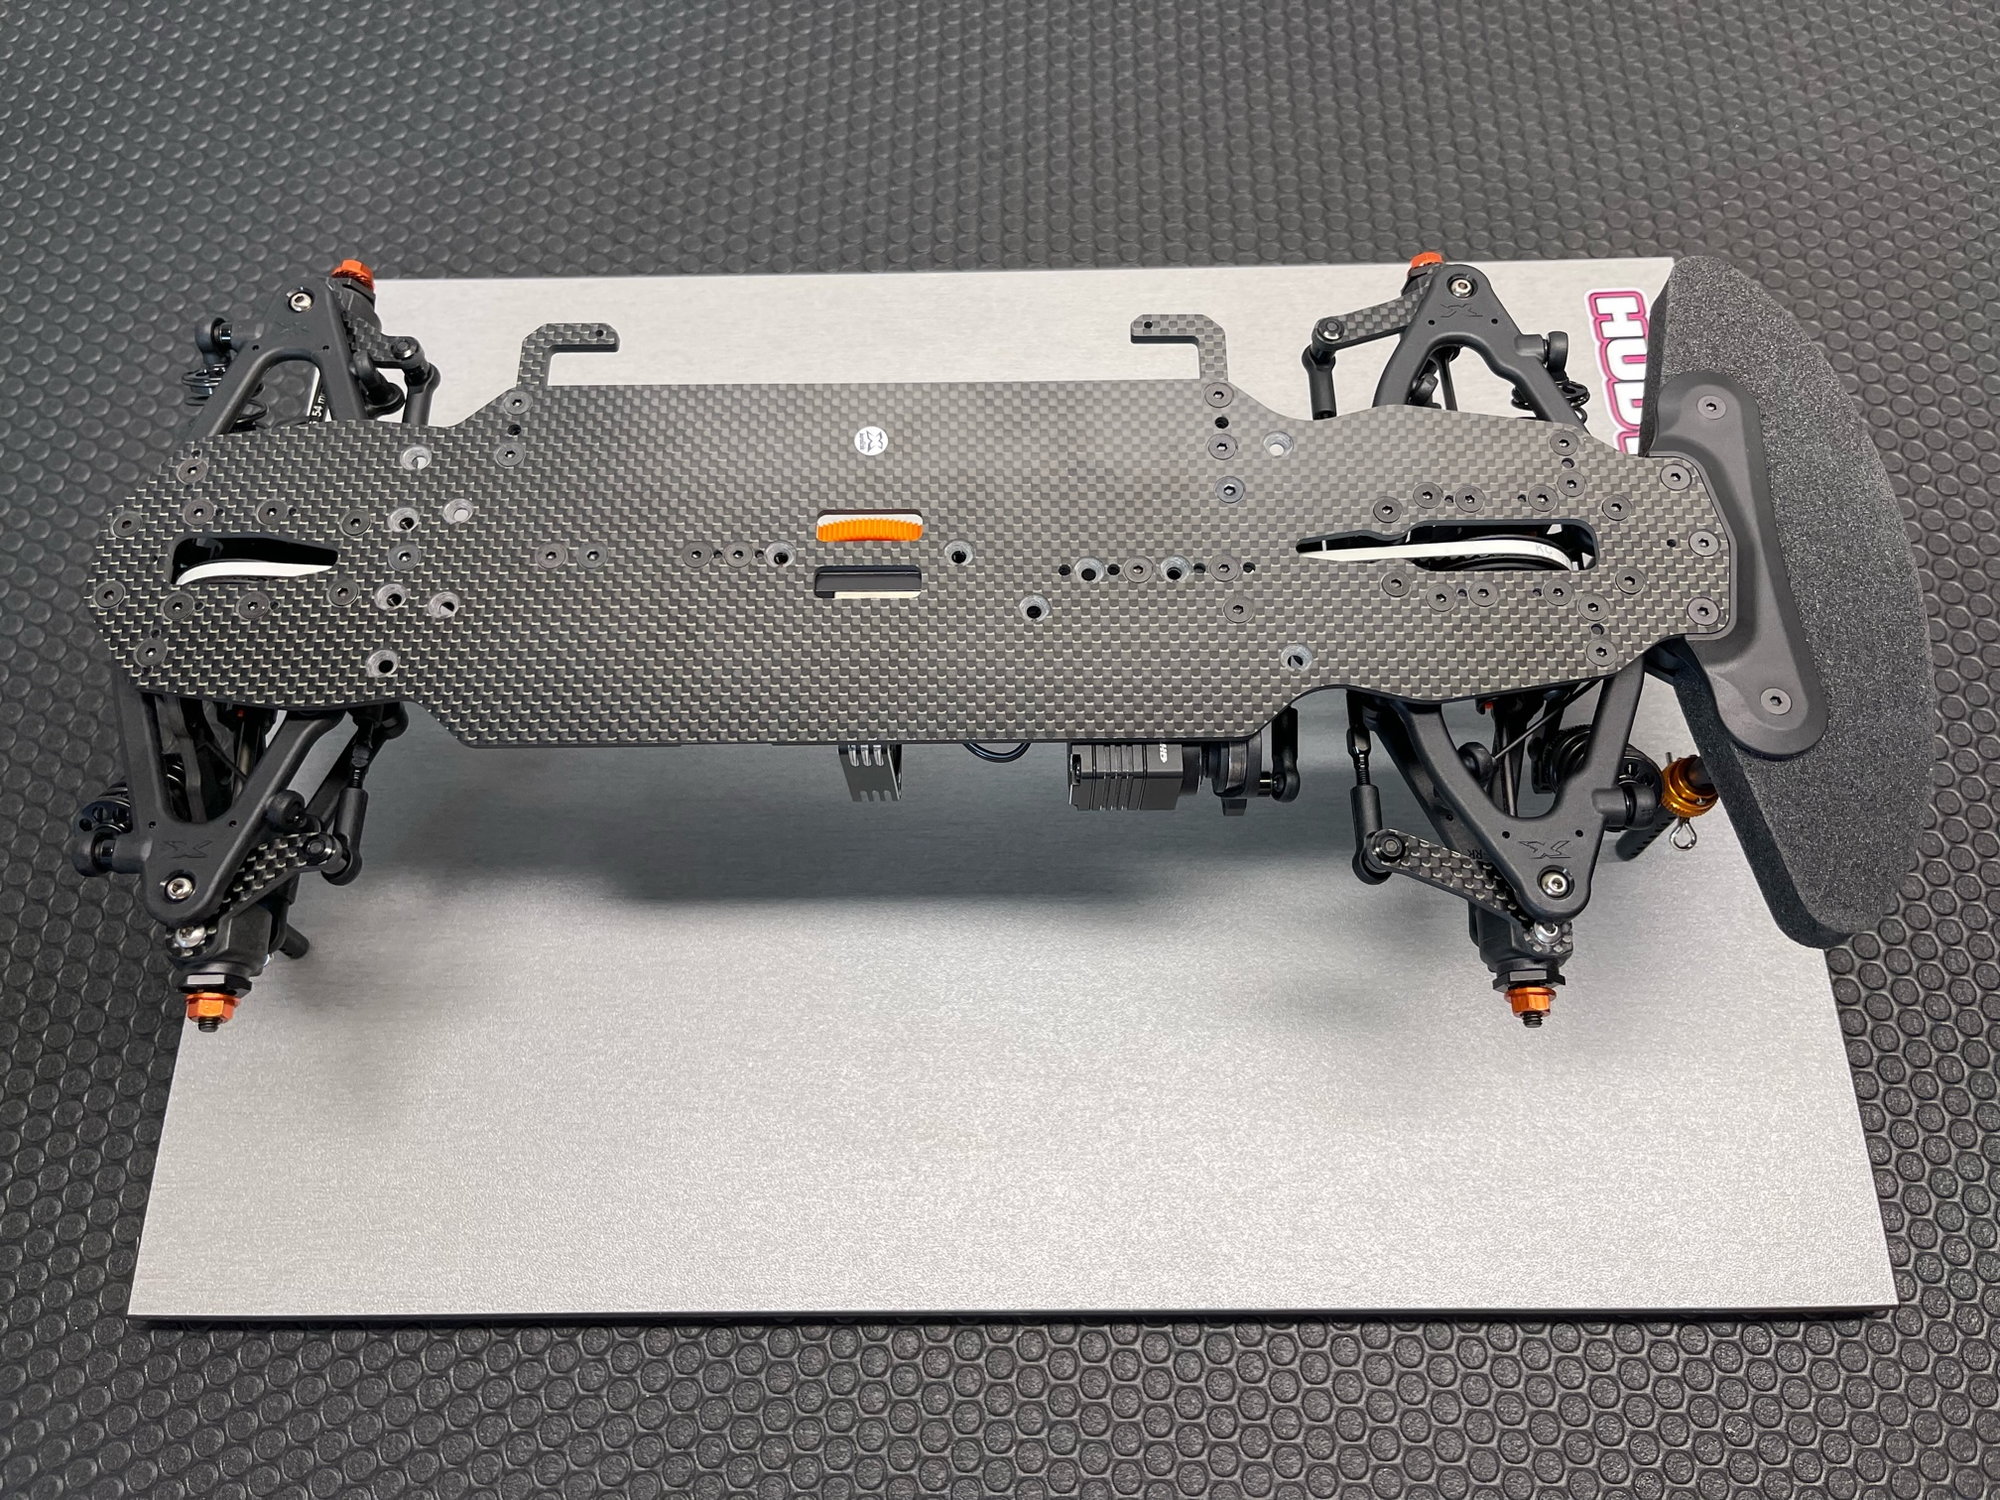 New Upgraded Xray X4 Graphite W/S15-X and spares - R/C Tech Forums